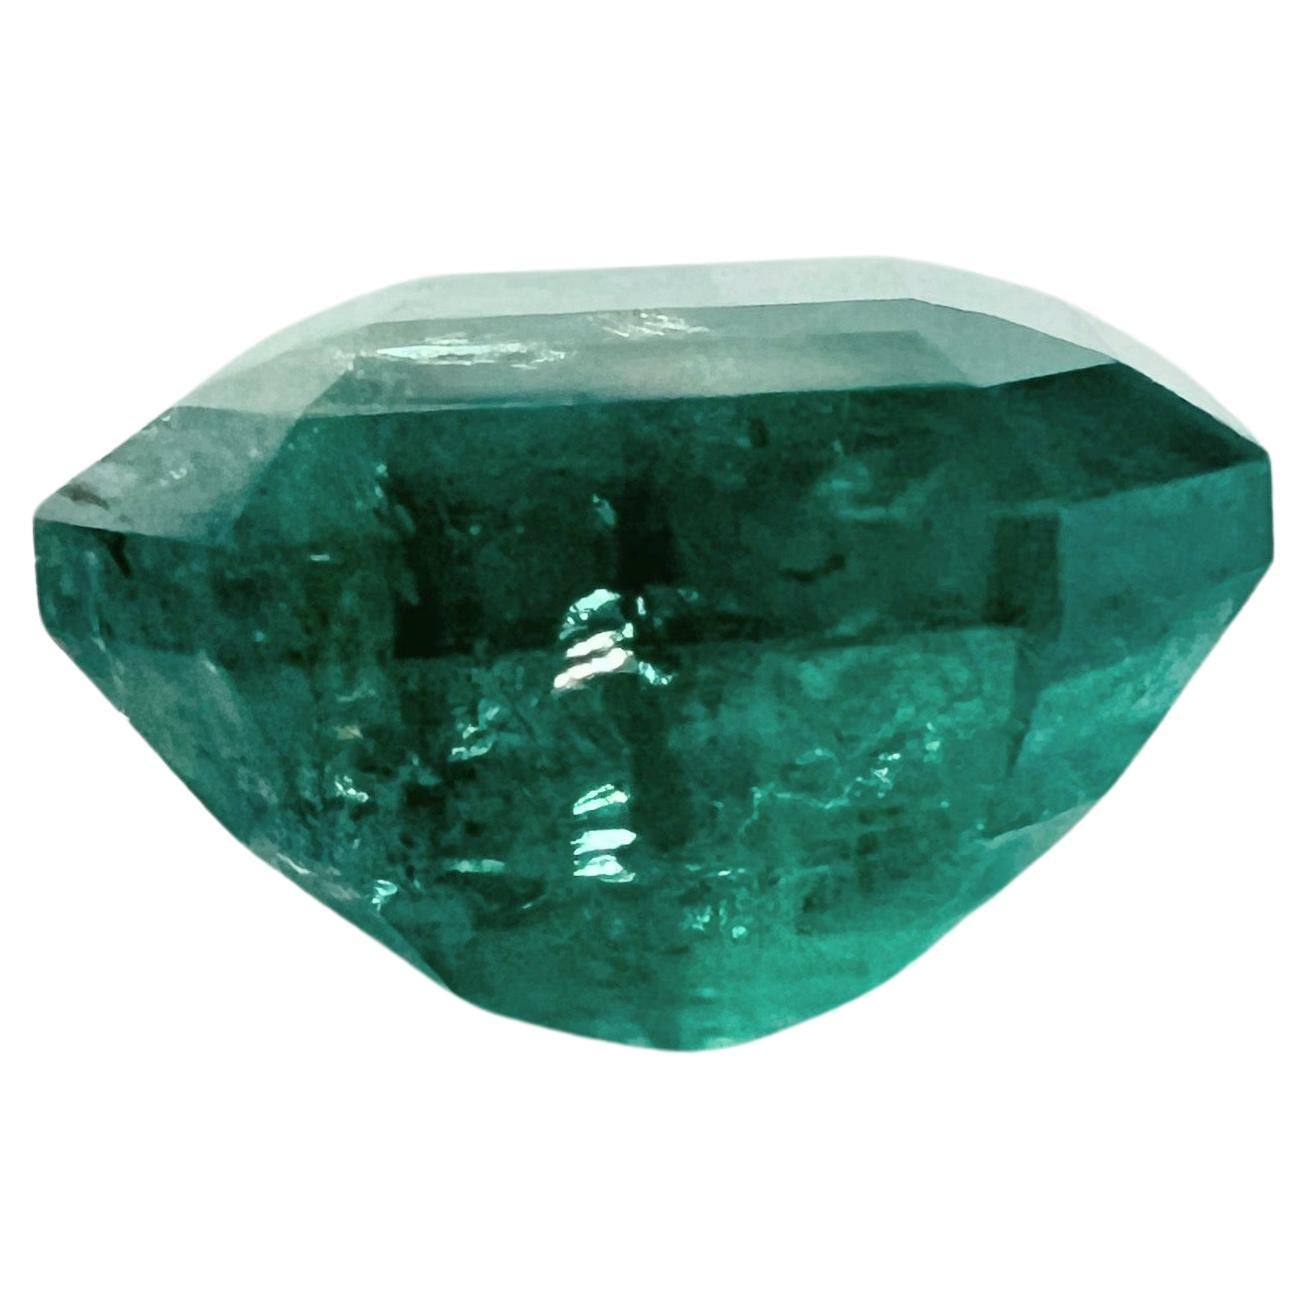 Indulge in the luxurious allure of our exquisite 5.25ct Non-oiled Emerald Cut Emerald Gemstone. This premium quality gemstone boasts a vibrant green hue that captures the essence of nature’s beauty. Meticulously cut in a classic emerald shape, it